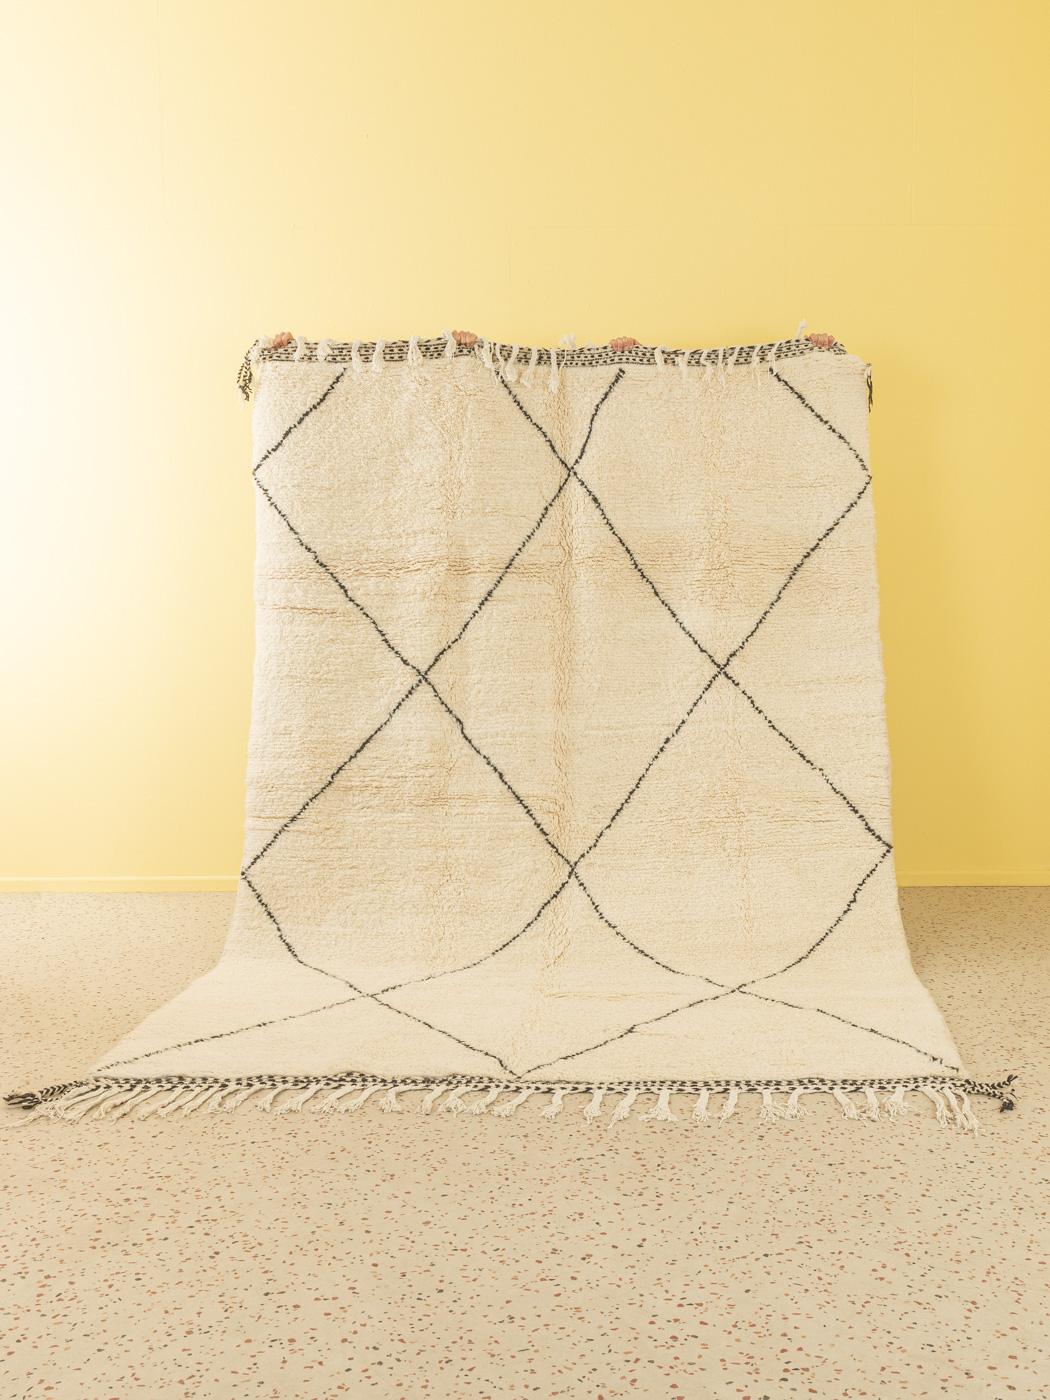 Timeless Beni is a contemporary 100% wool rug – thick and soft, comfortable underfoot. Our Berber rugs are handwoven and handknotted by Amazigh women in the Atlas Mountains. These communities have been crafting rugs for thousands of years. One knot